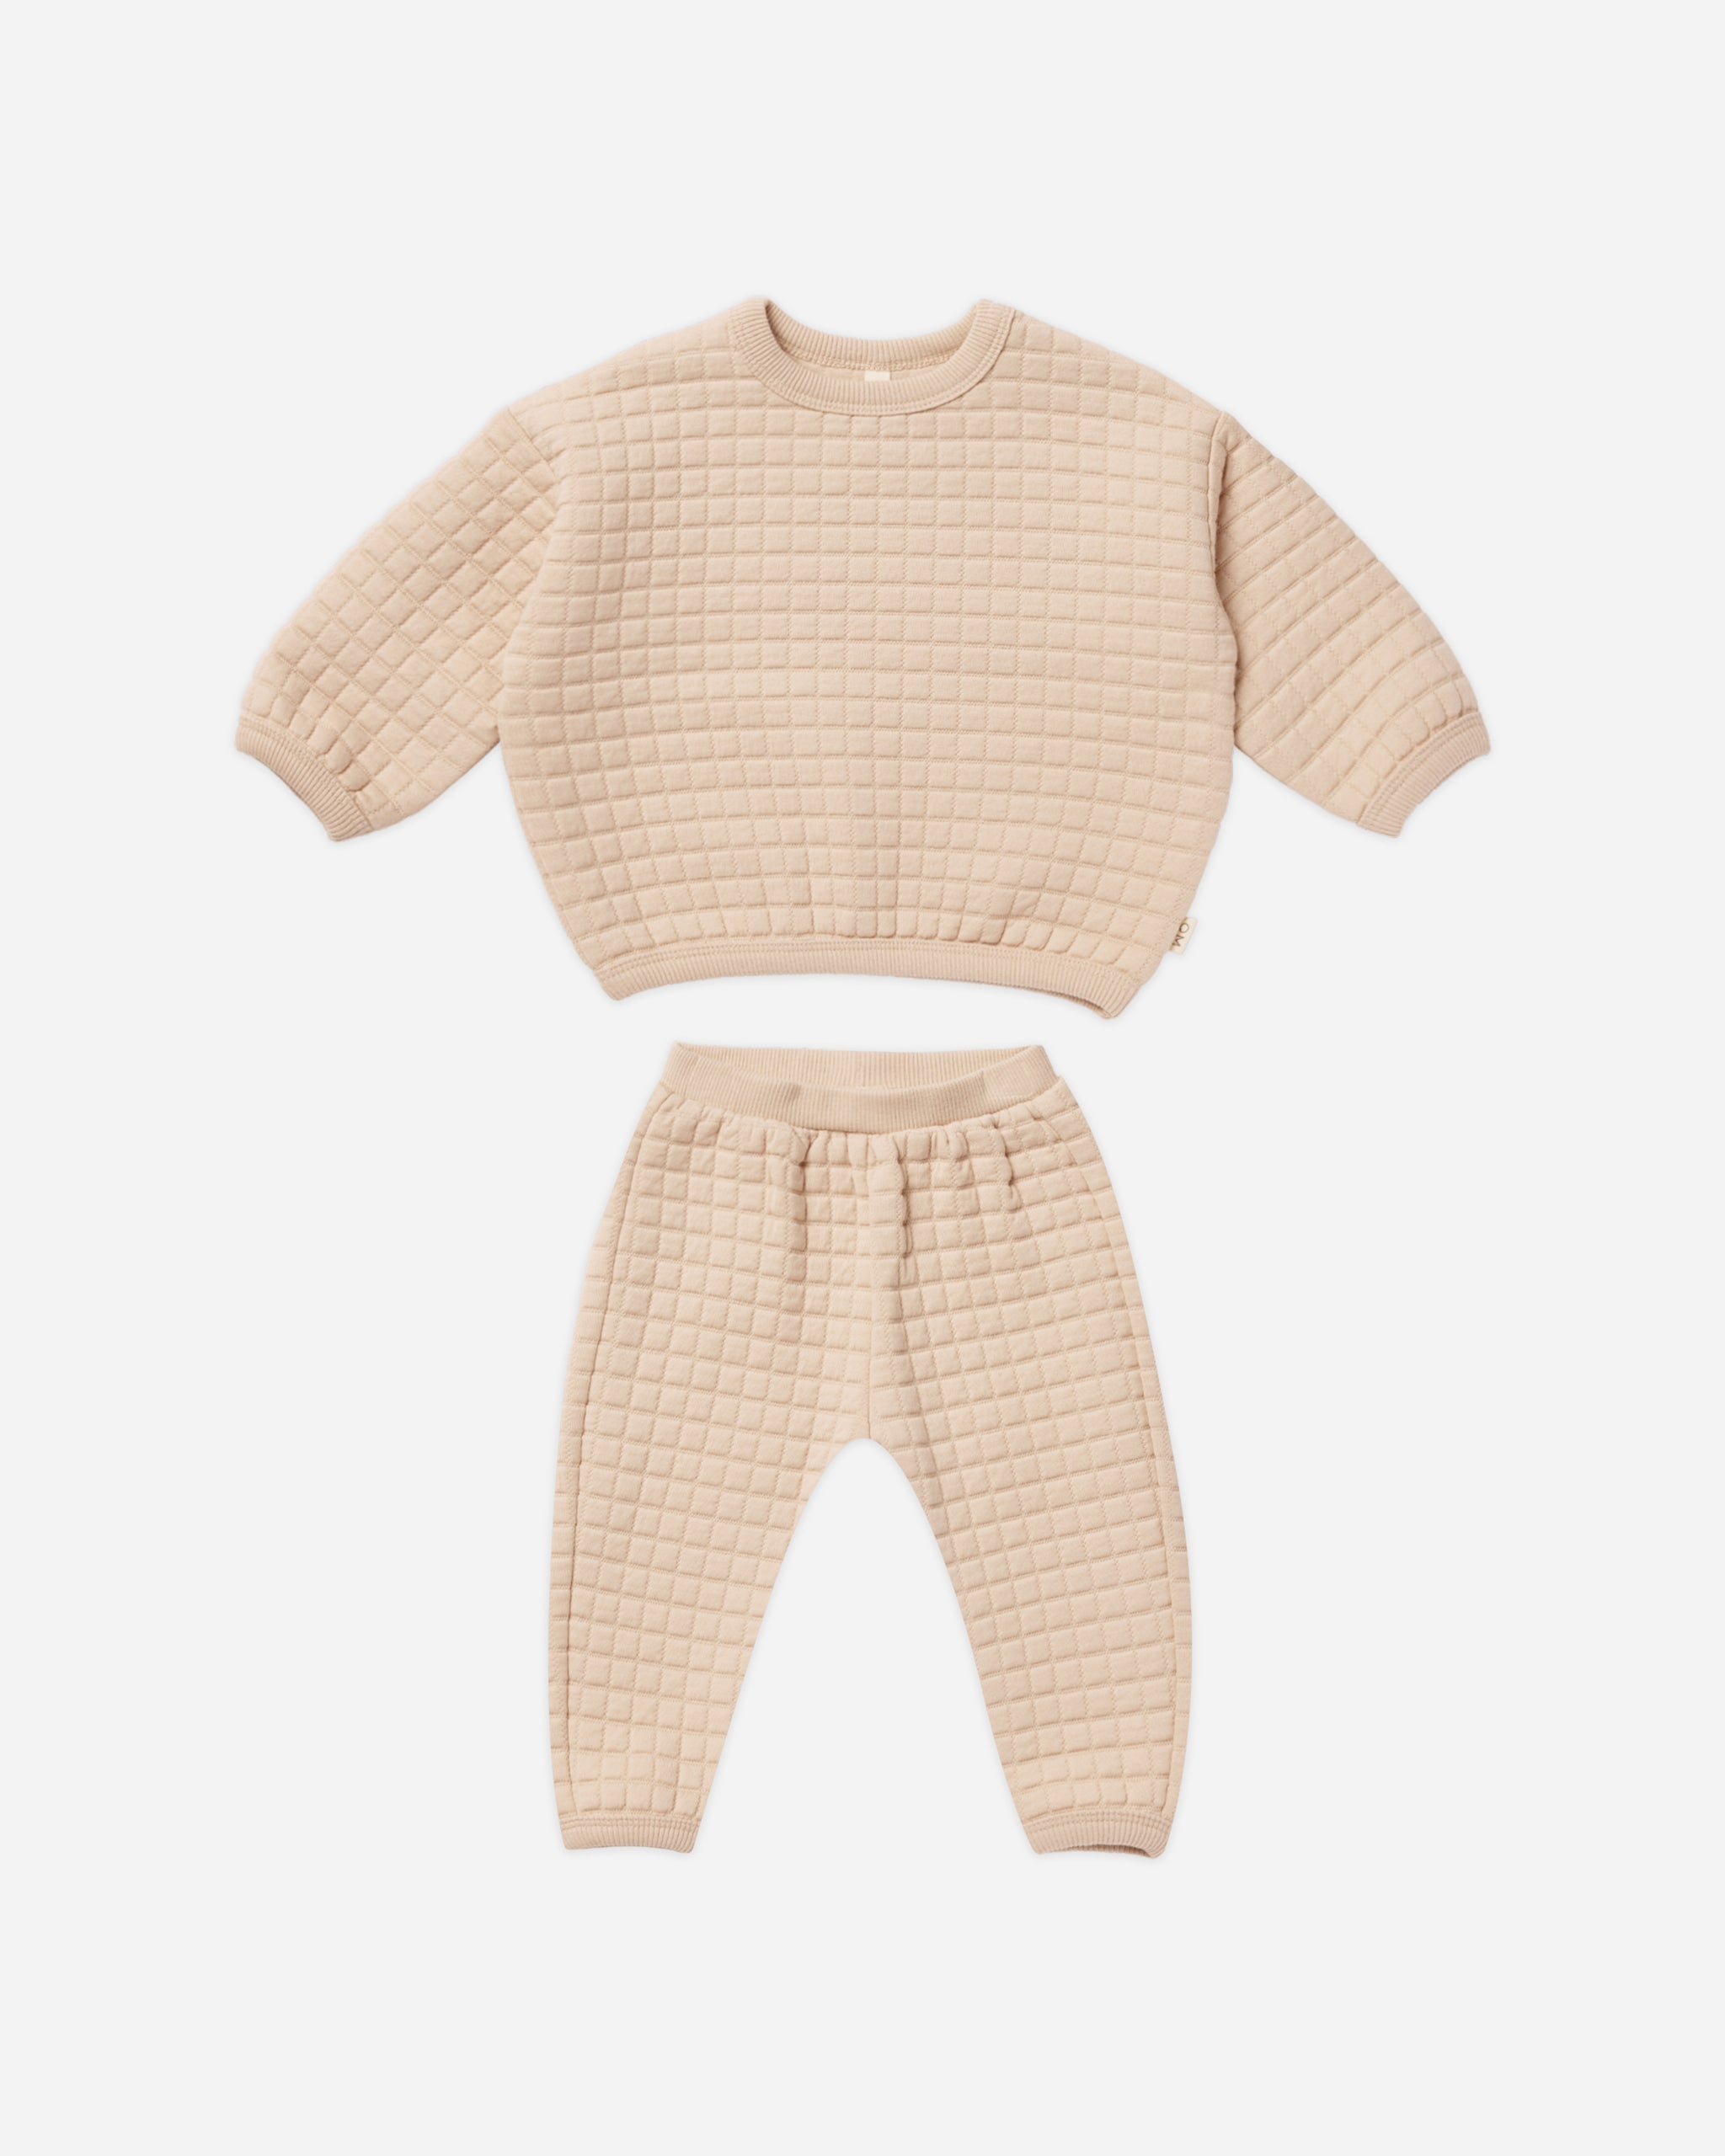 Quilted Sweater + Pant Set || Shell